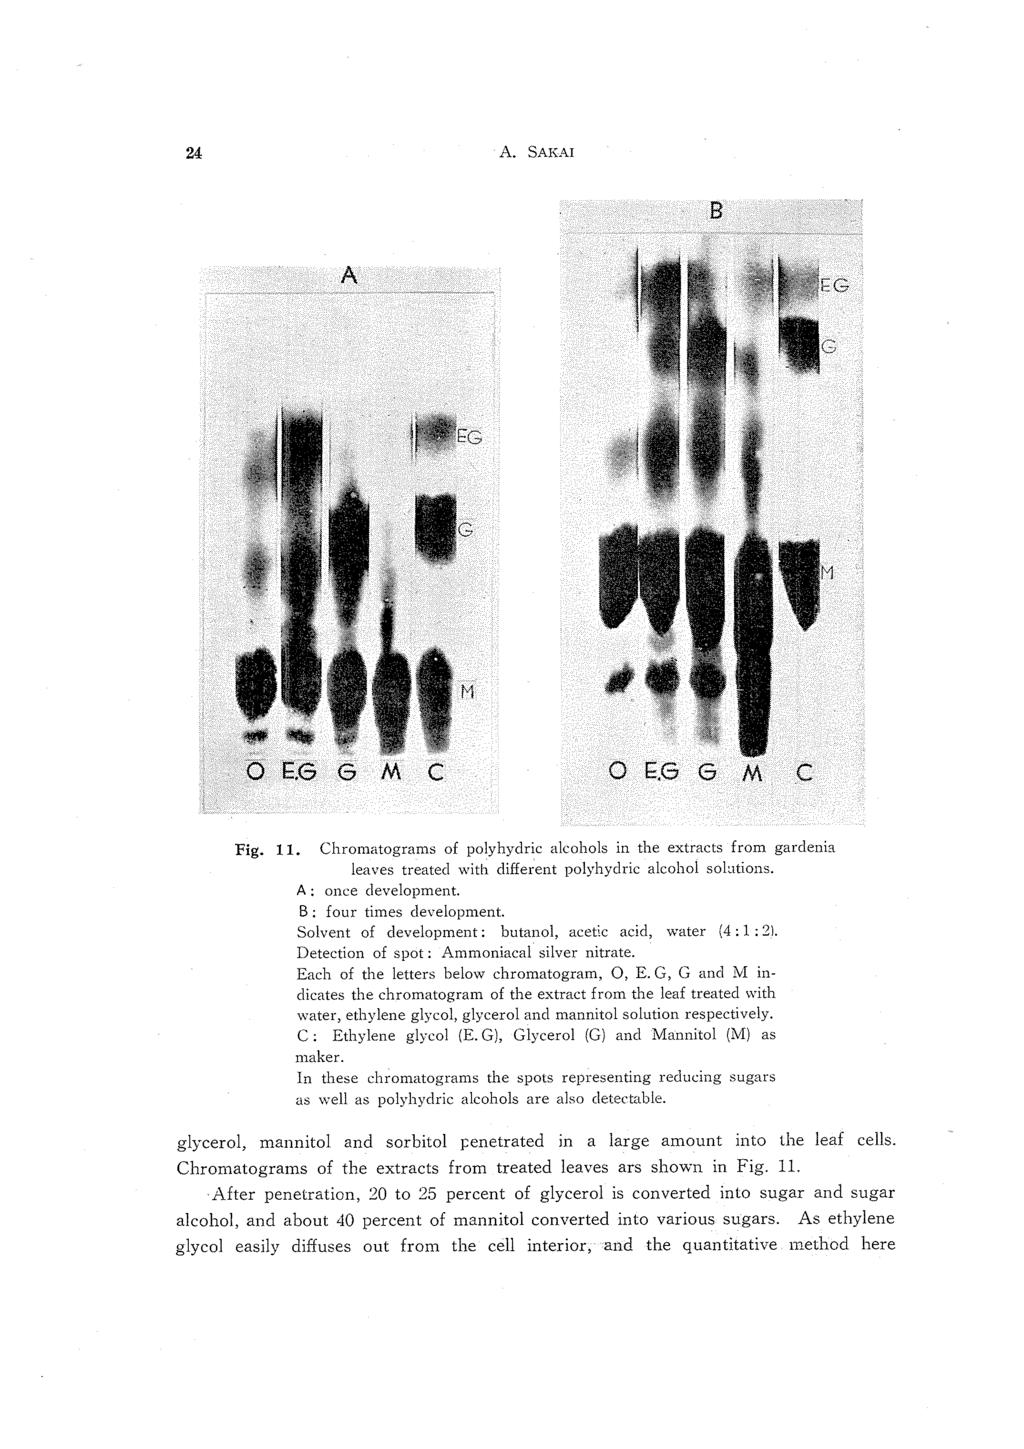 24 A. SAKAI A o t:.6 6 M C Fig. 11. Chromatograms of poly hydric alcohols in the extracts from gardenia leaves treated with different polyhydric alcohol so lations. A: once development.